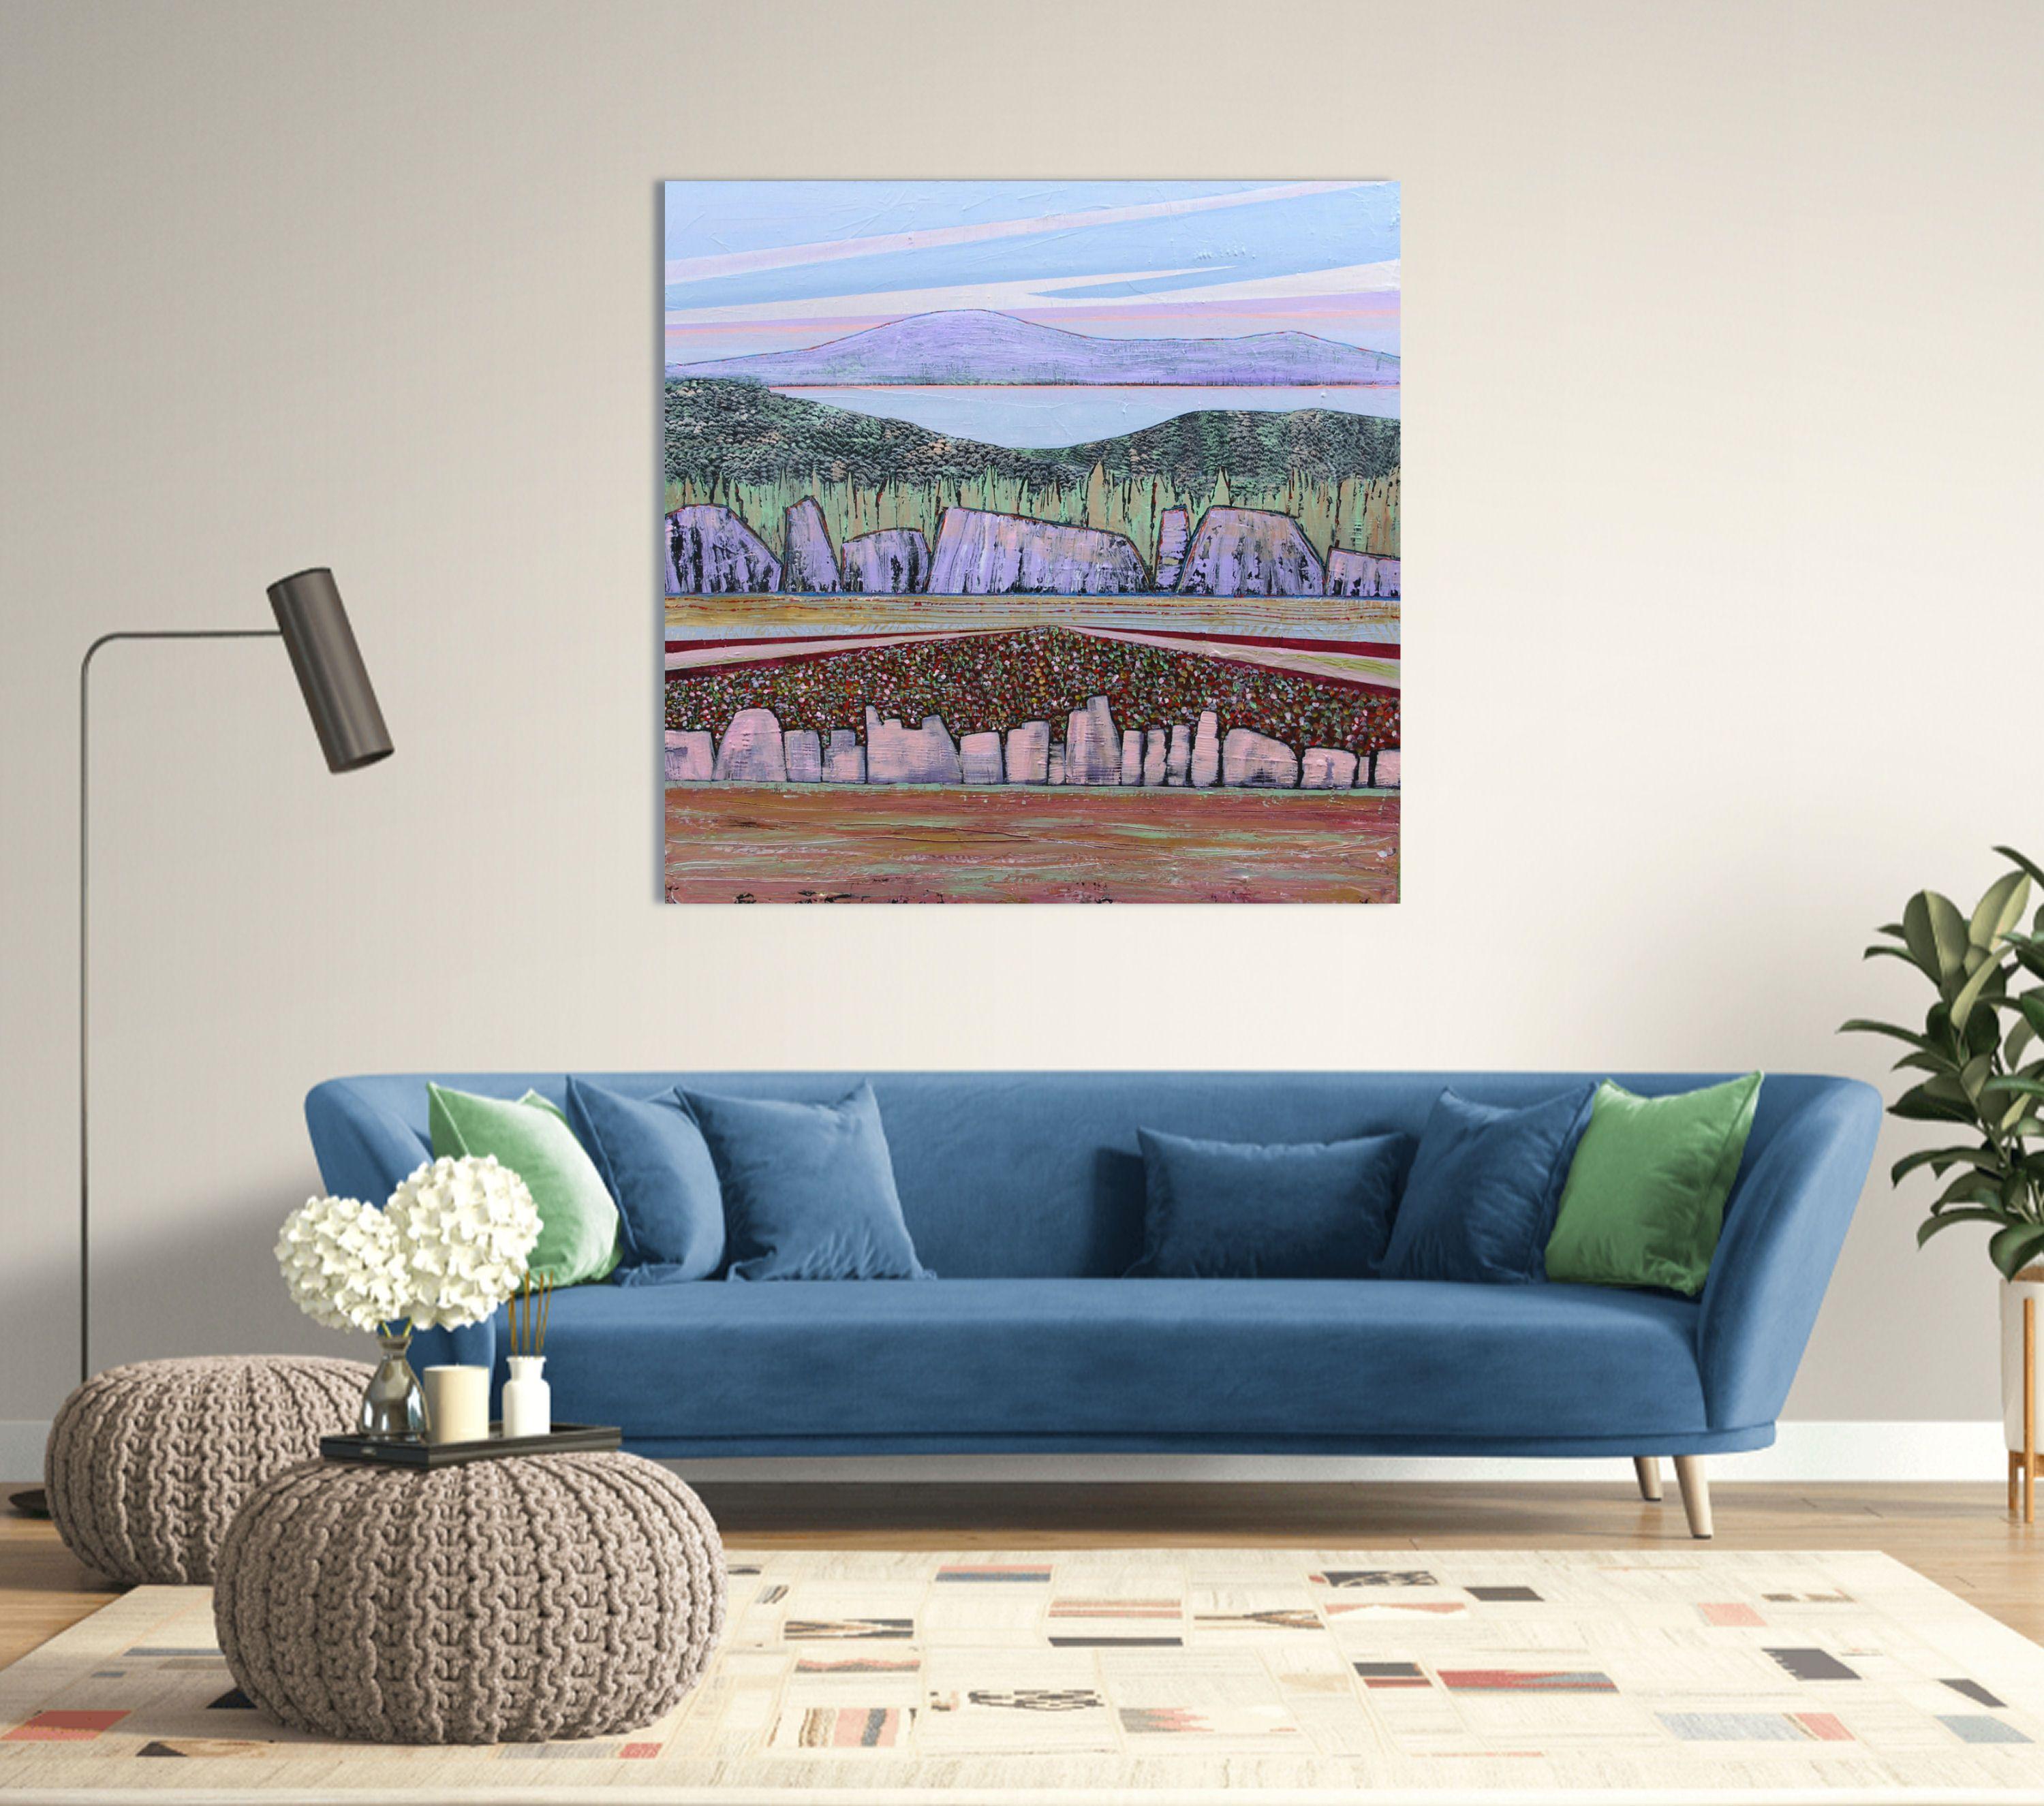 In this creation I combined my love of rock formations with a field of flowers and all the soothing tones of Mother Nature.  My personal, signature stamp is on the back.  ** Please note that due to the size of the canvas, it will be shipped rolled